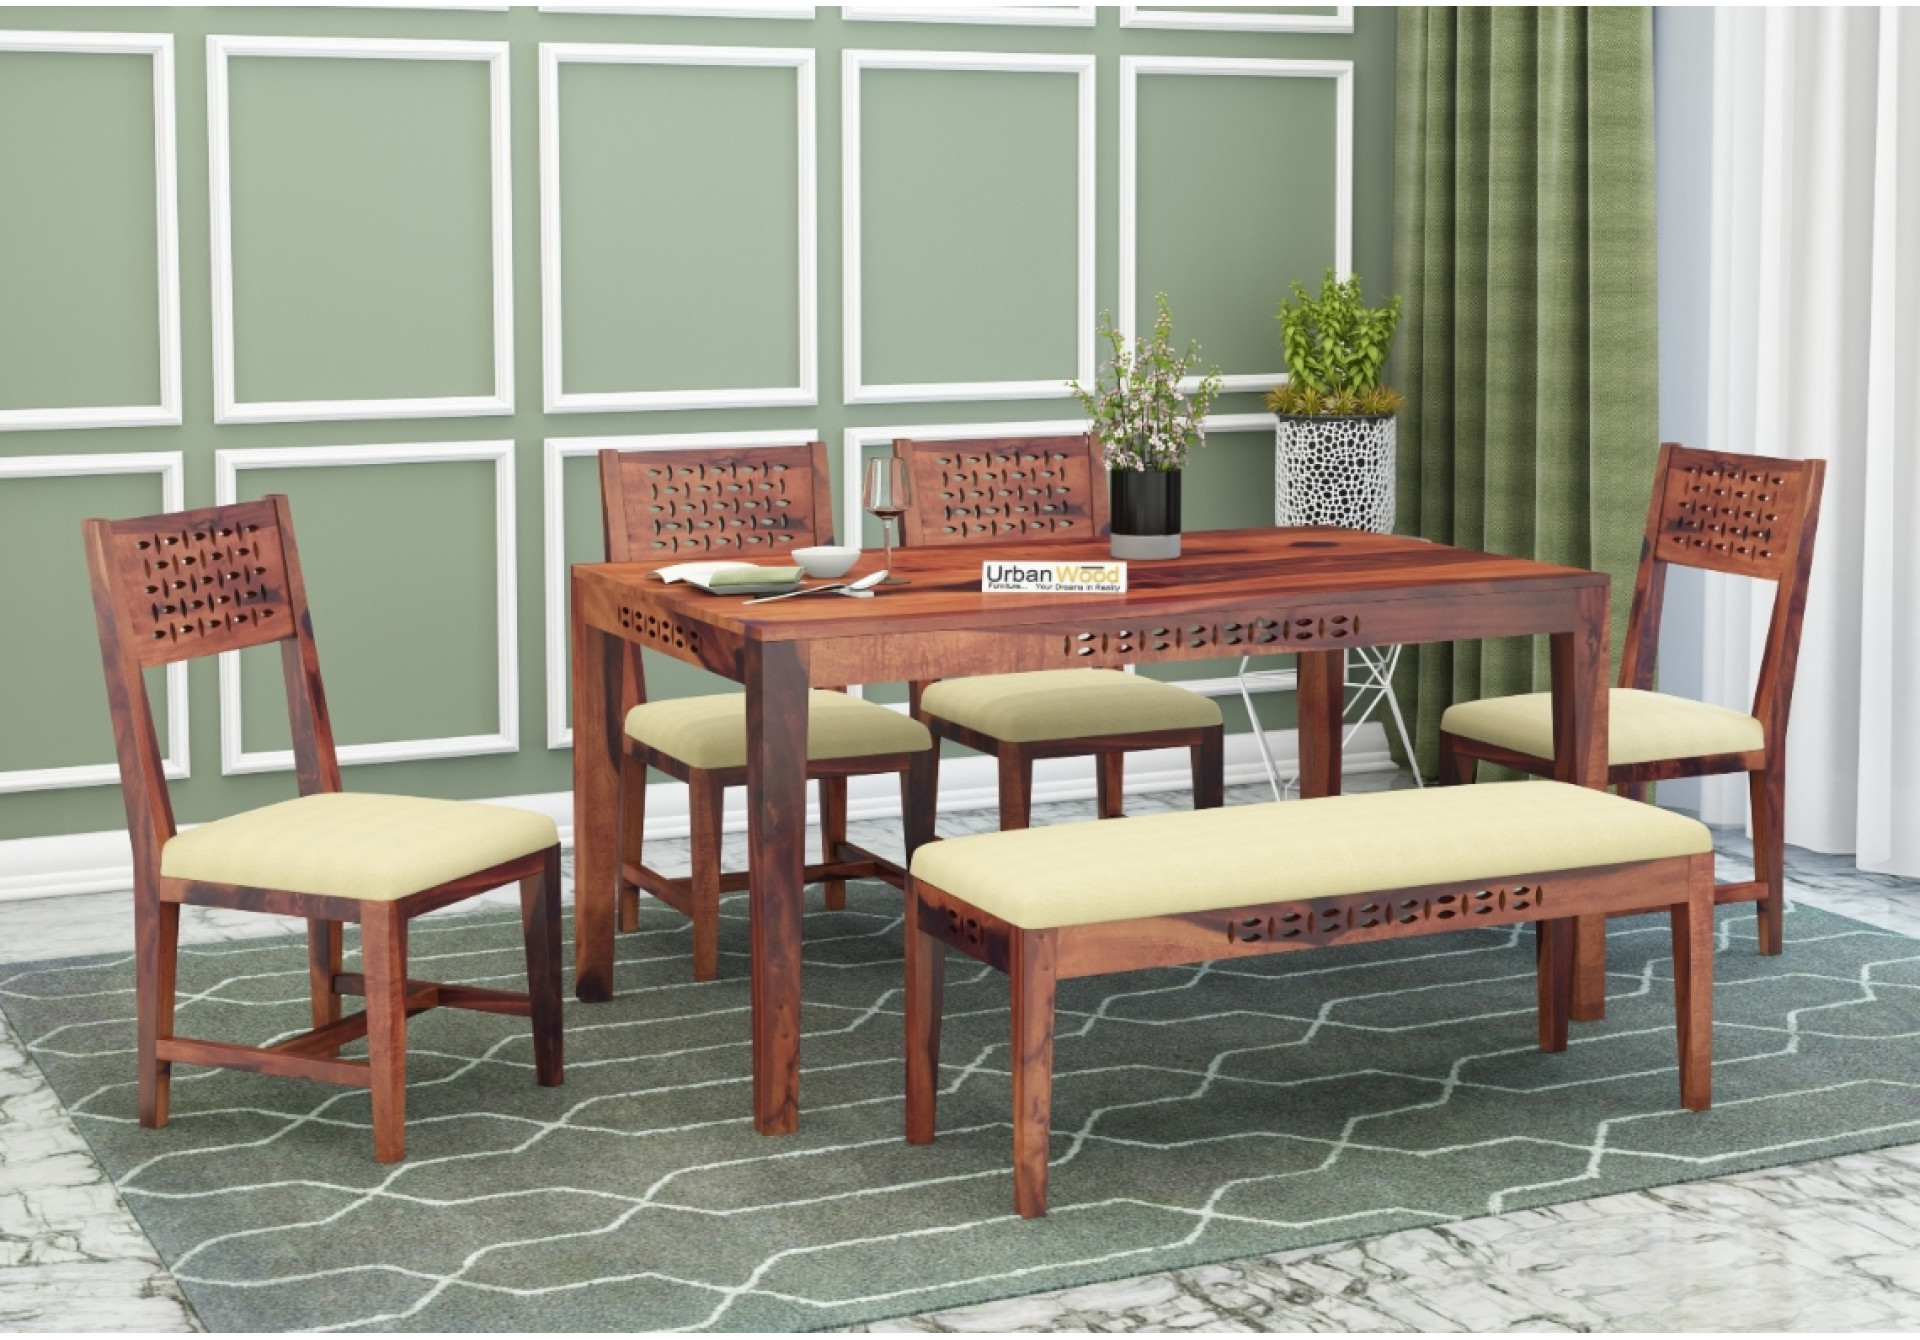 Woodora 6 Seater Dining Set Cushion With Bench 